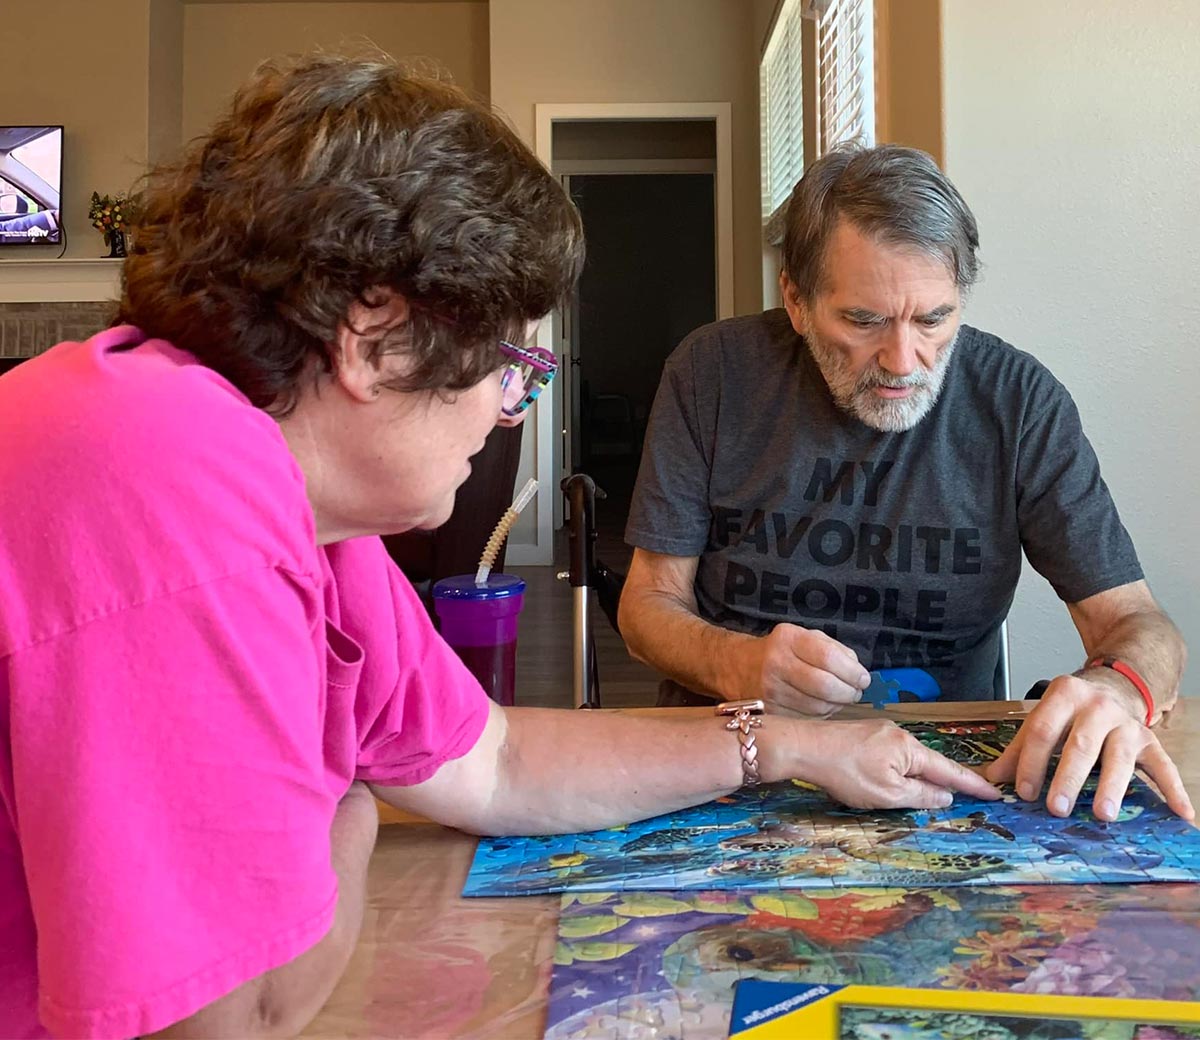 Susan Bergeson and Jim Bertrand seated at a table and working on a jigsaw puzzle